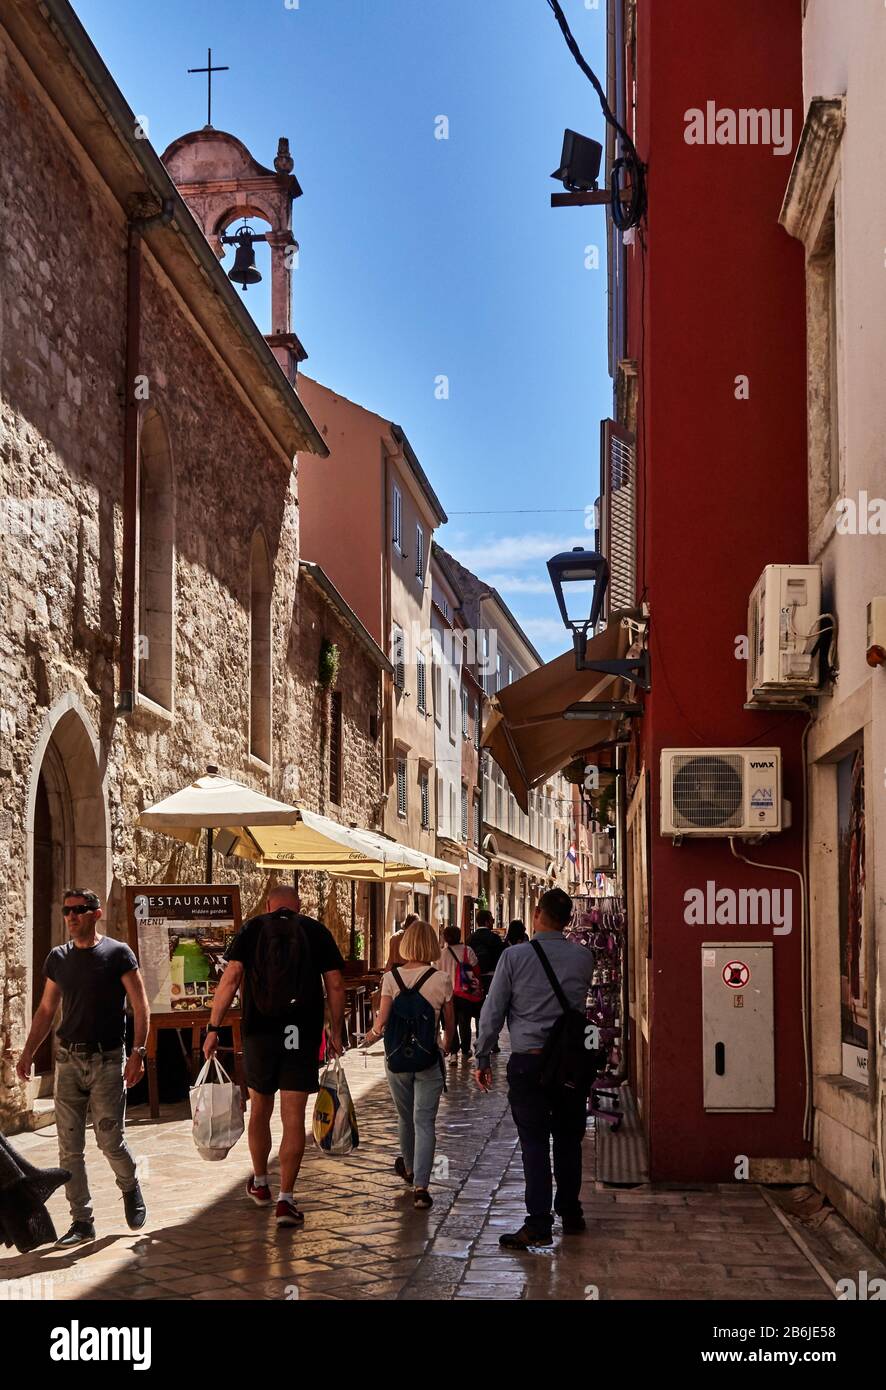 Zadar, Dalmatia province, Croatia, Traditional painted houses, in pedestrian street paved with limestone of the old town, Zadar is an adorable fortified city, Stock Photo